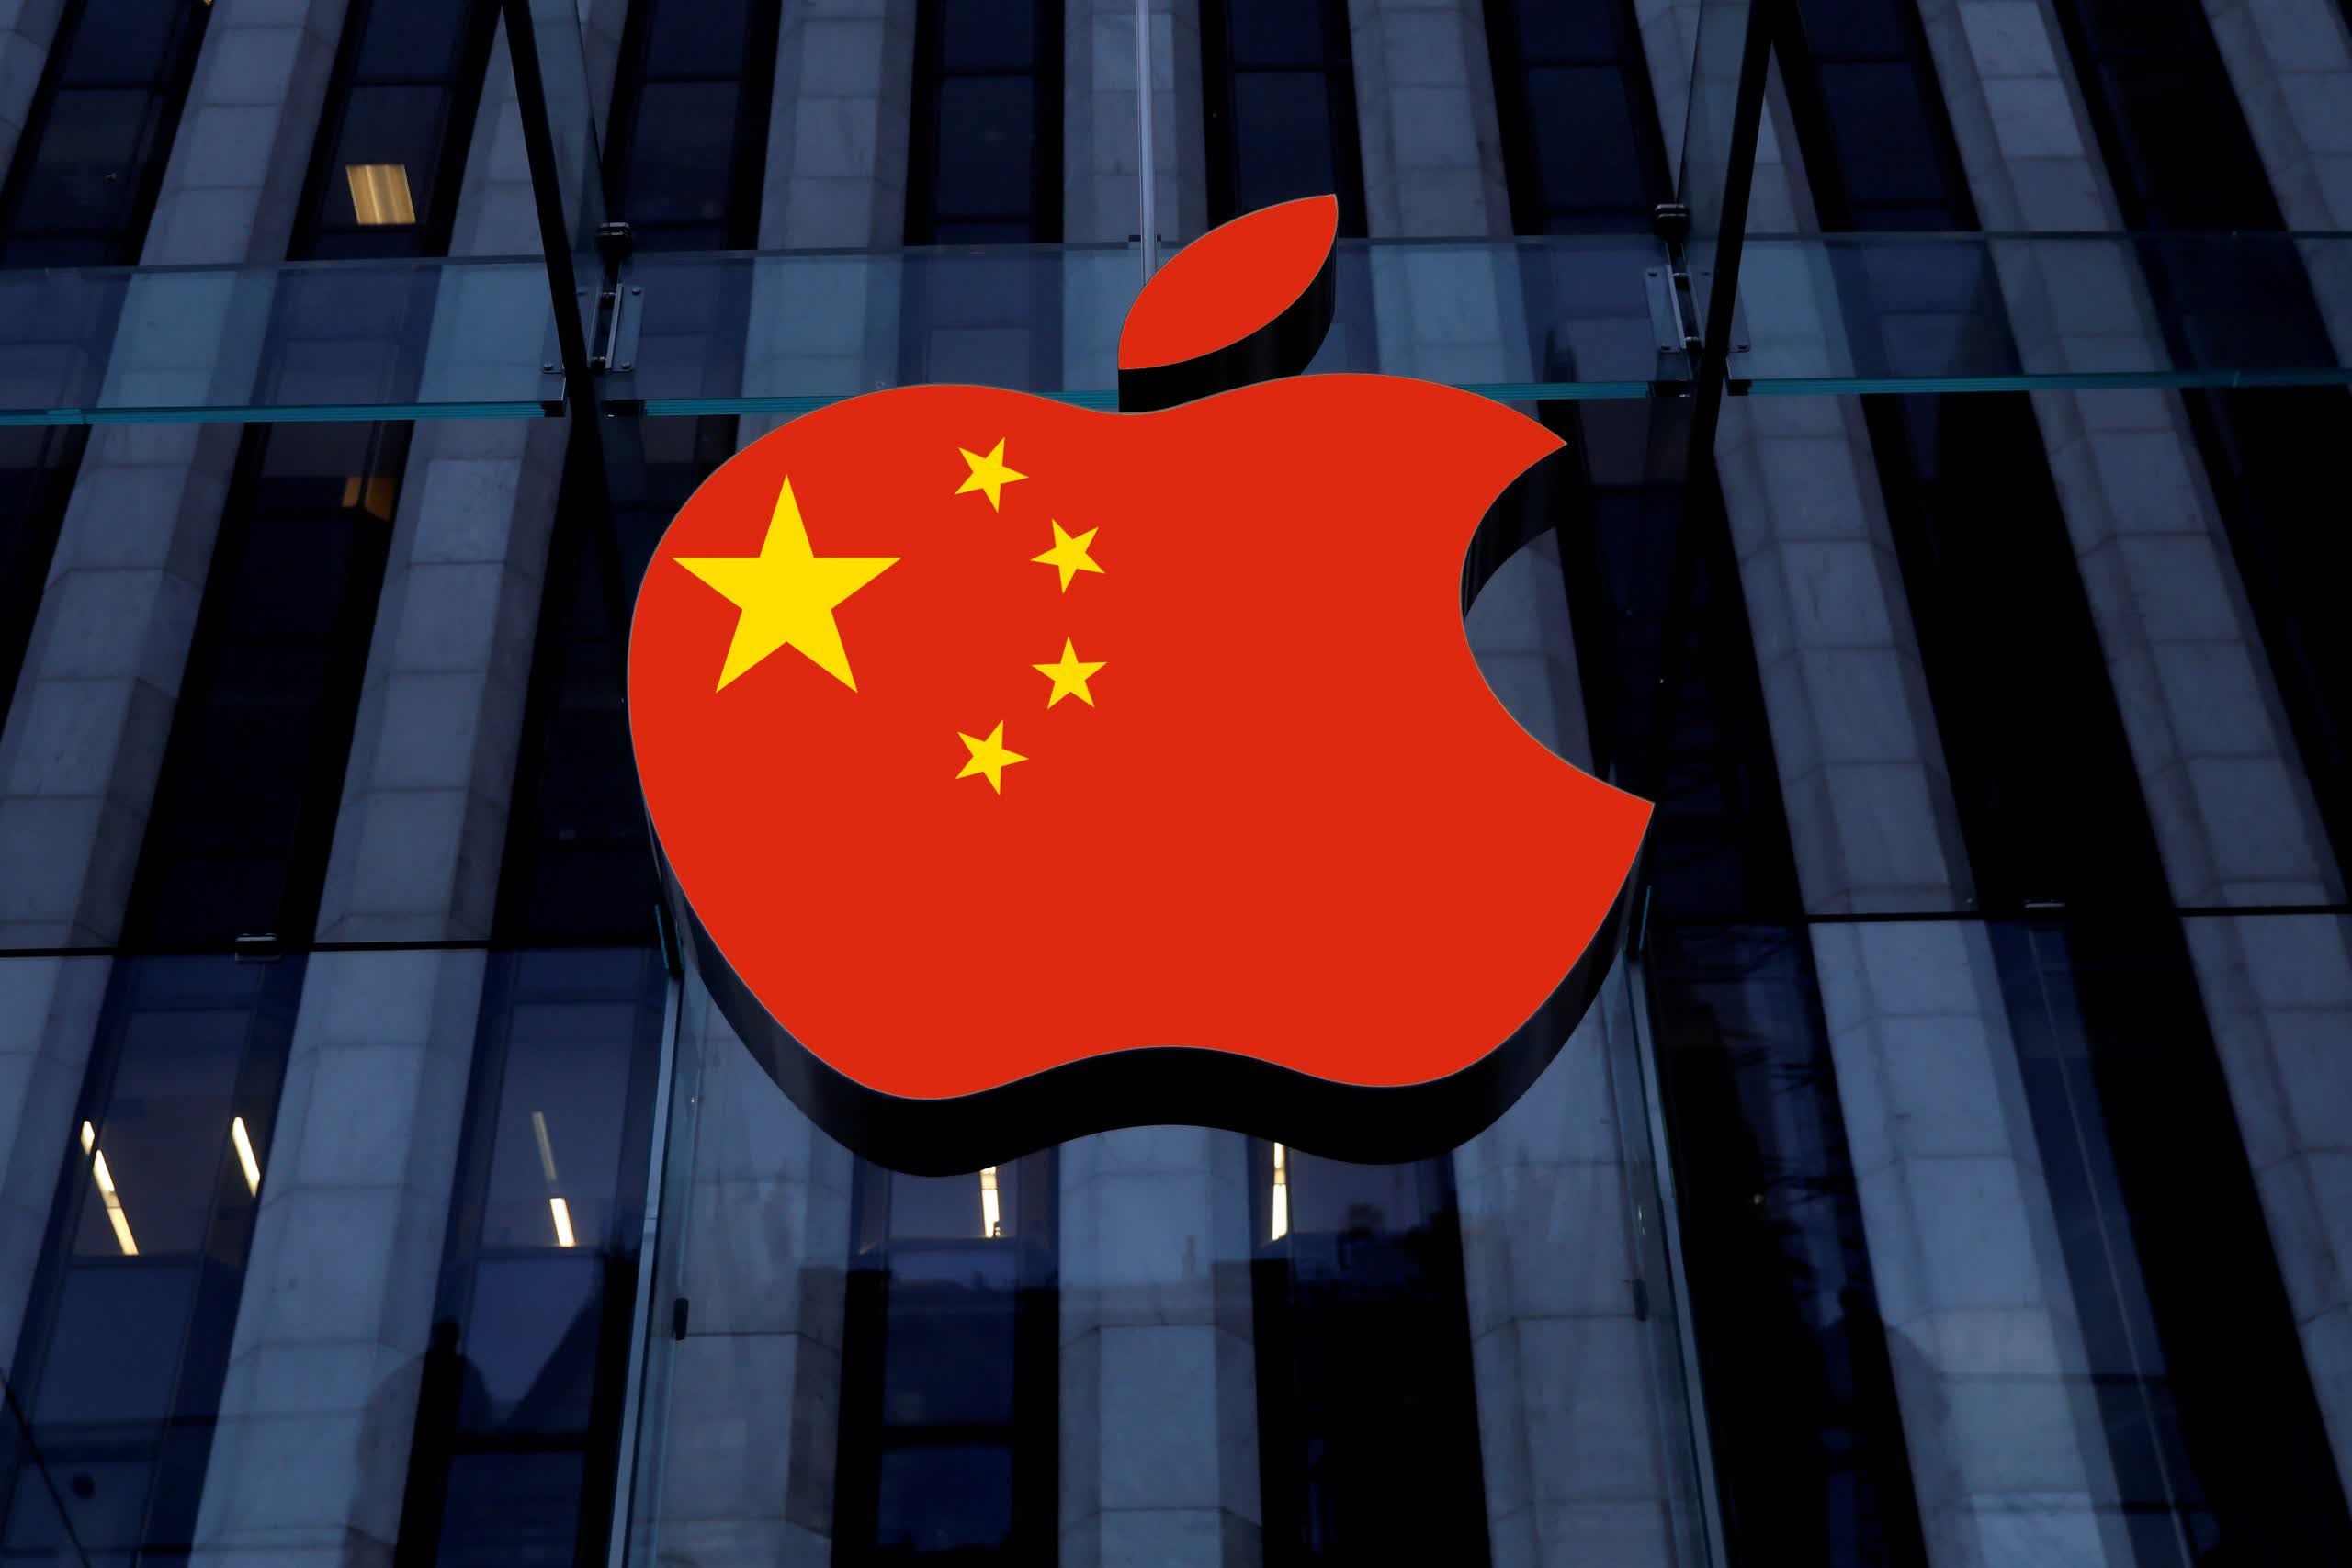 Tim Cook praises China, calls its relationship with Apple symbiotic